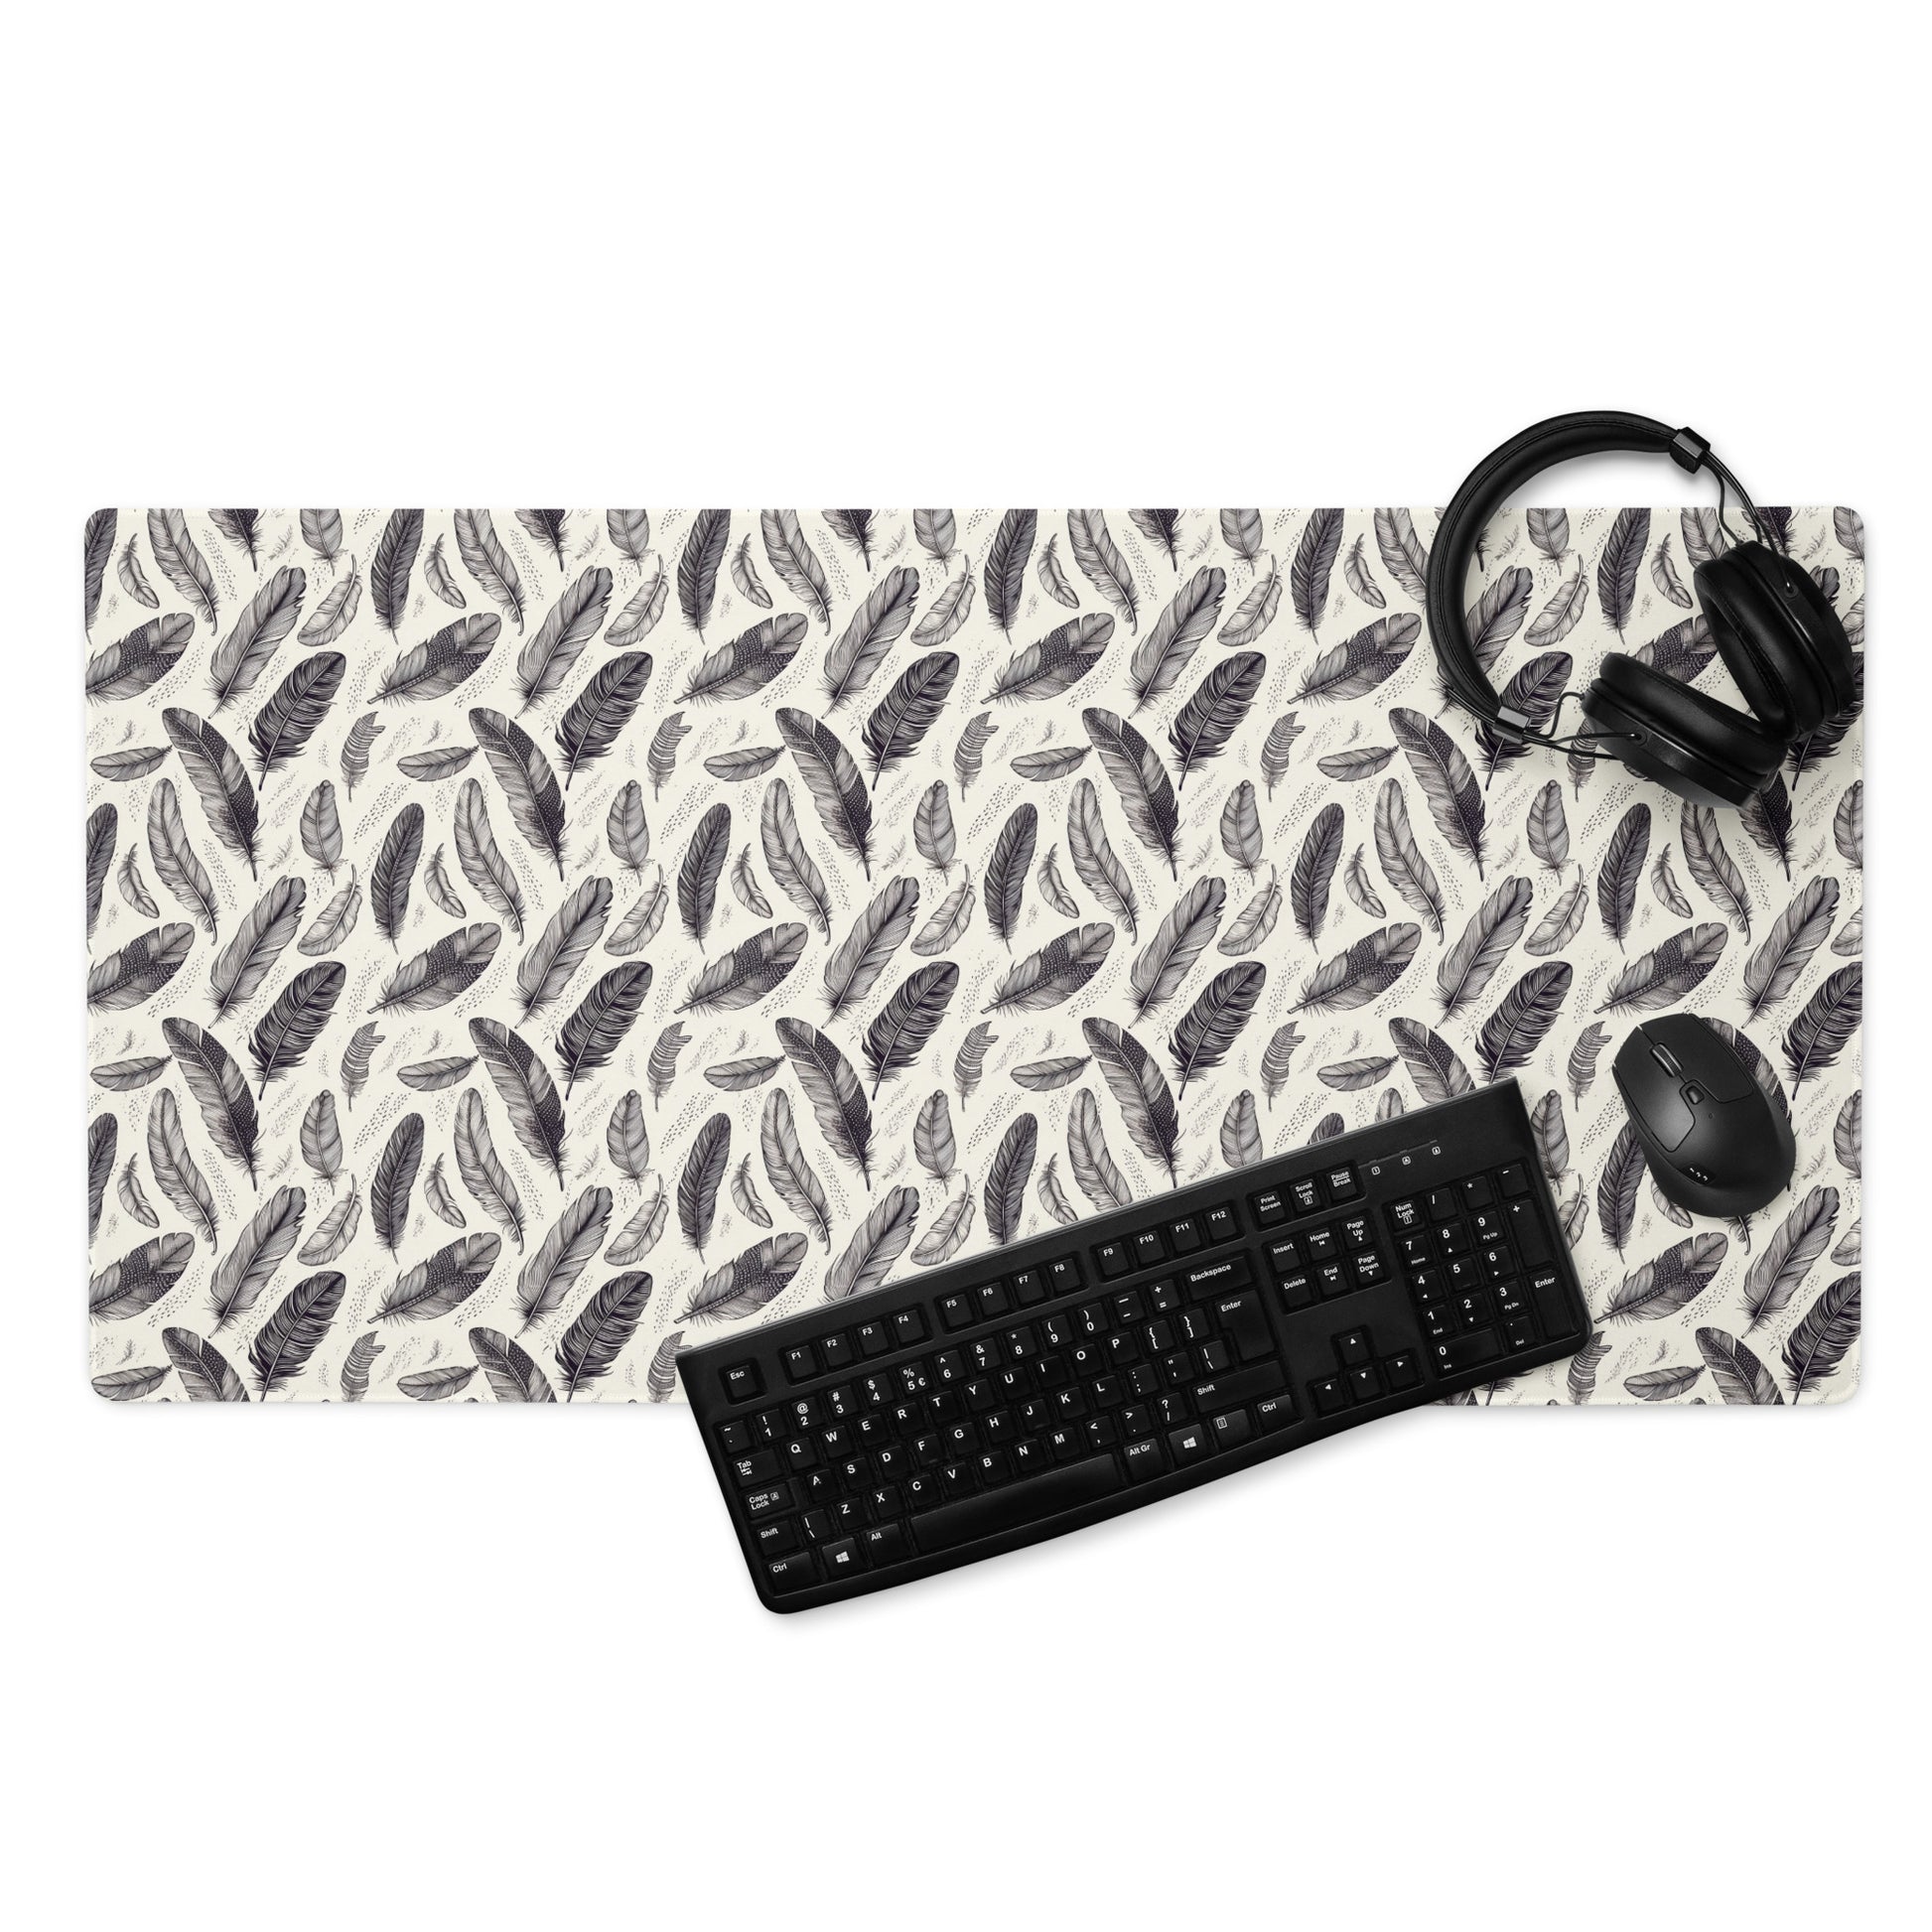 A 36" x 18" gaming desk pad with black and white feathers. A keyboard, mouse, and headphones sit on it.